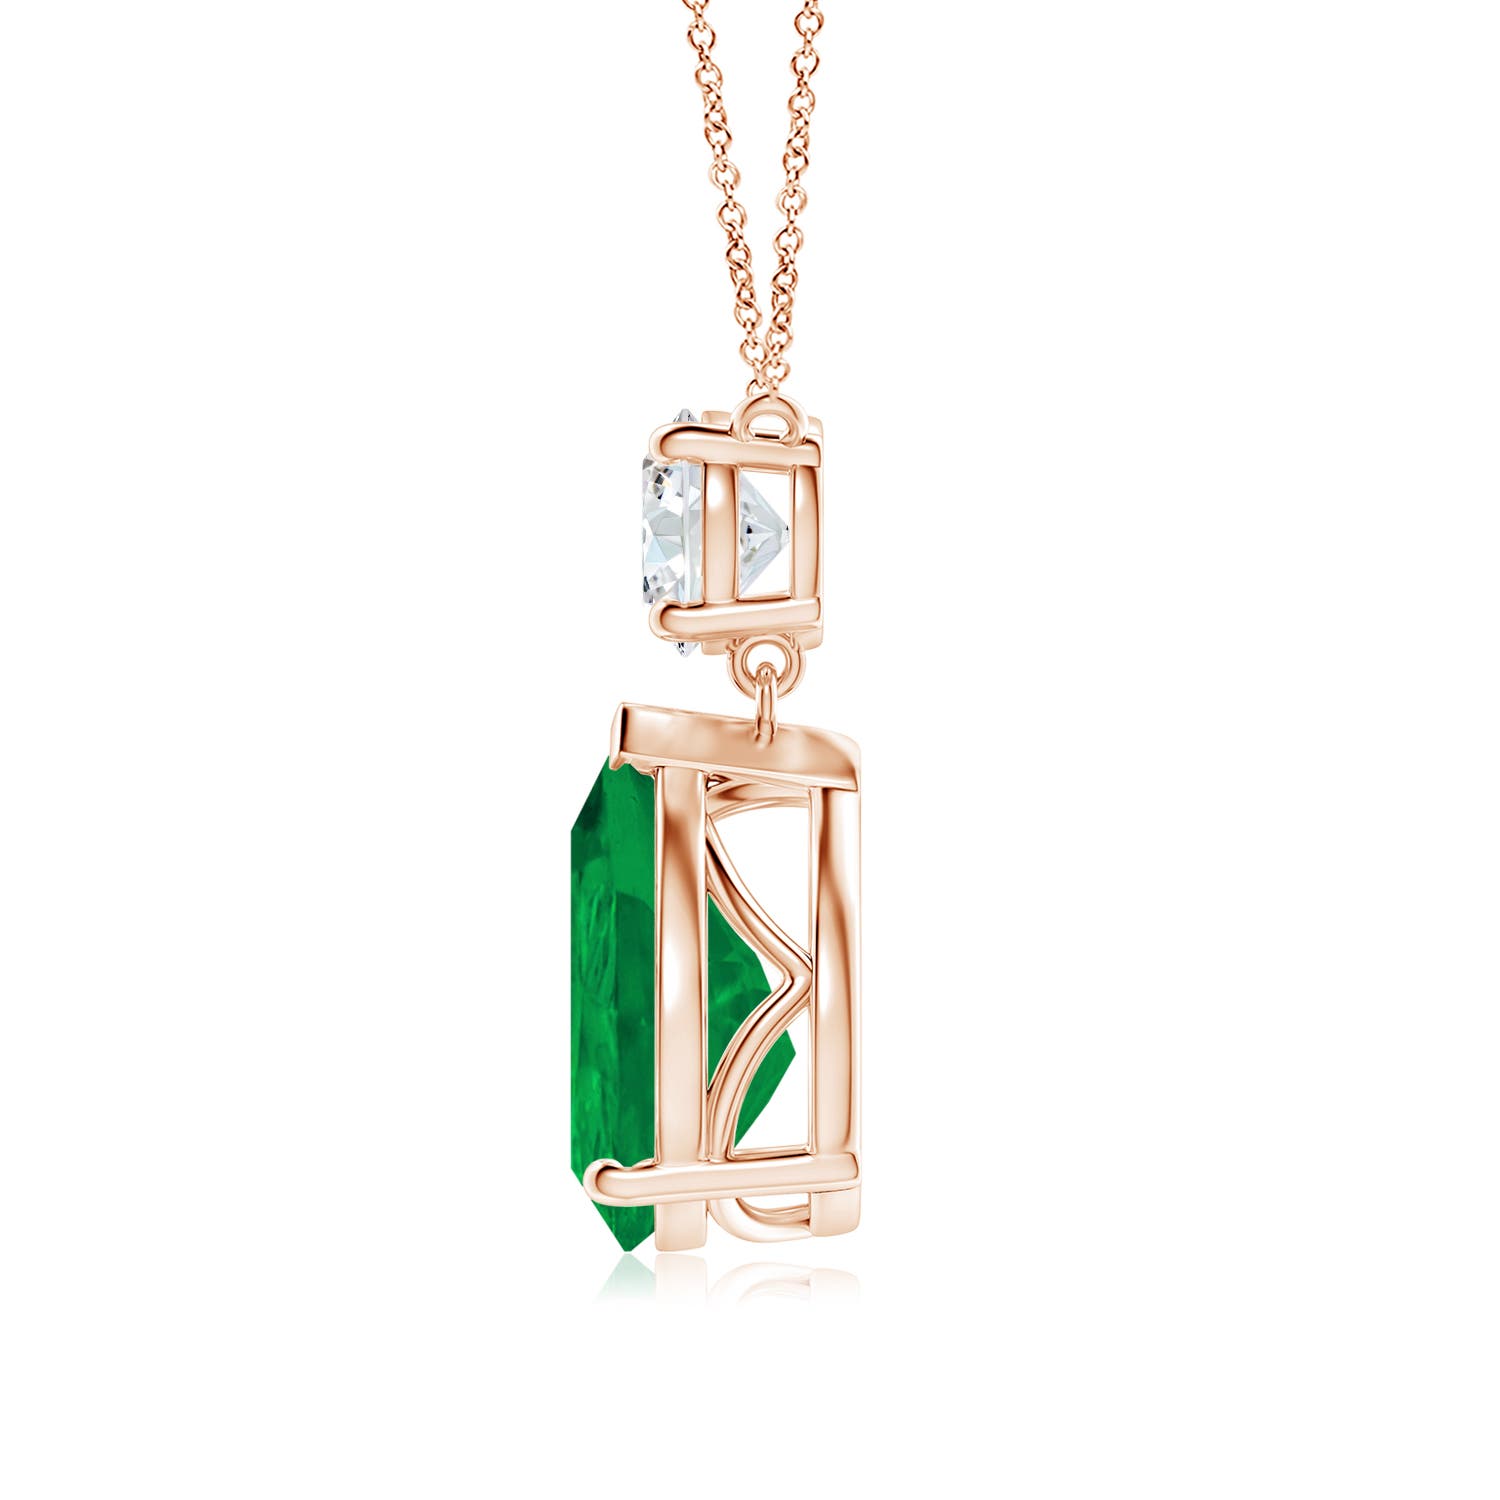 AA - Emerald / 5.21 CT / 14 KT Rose Gold